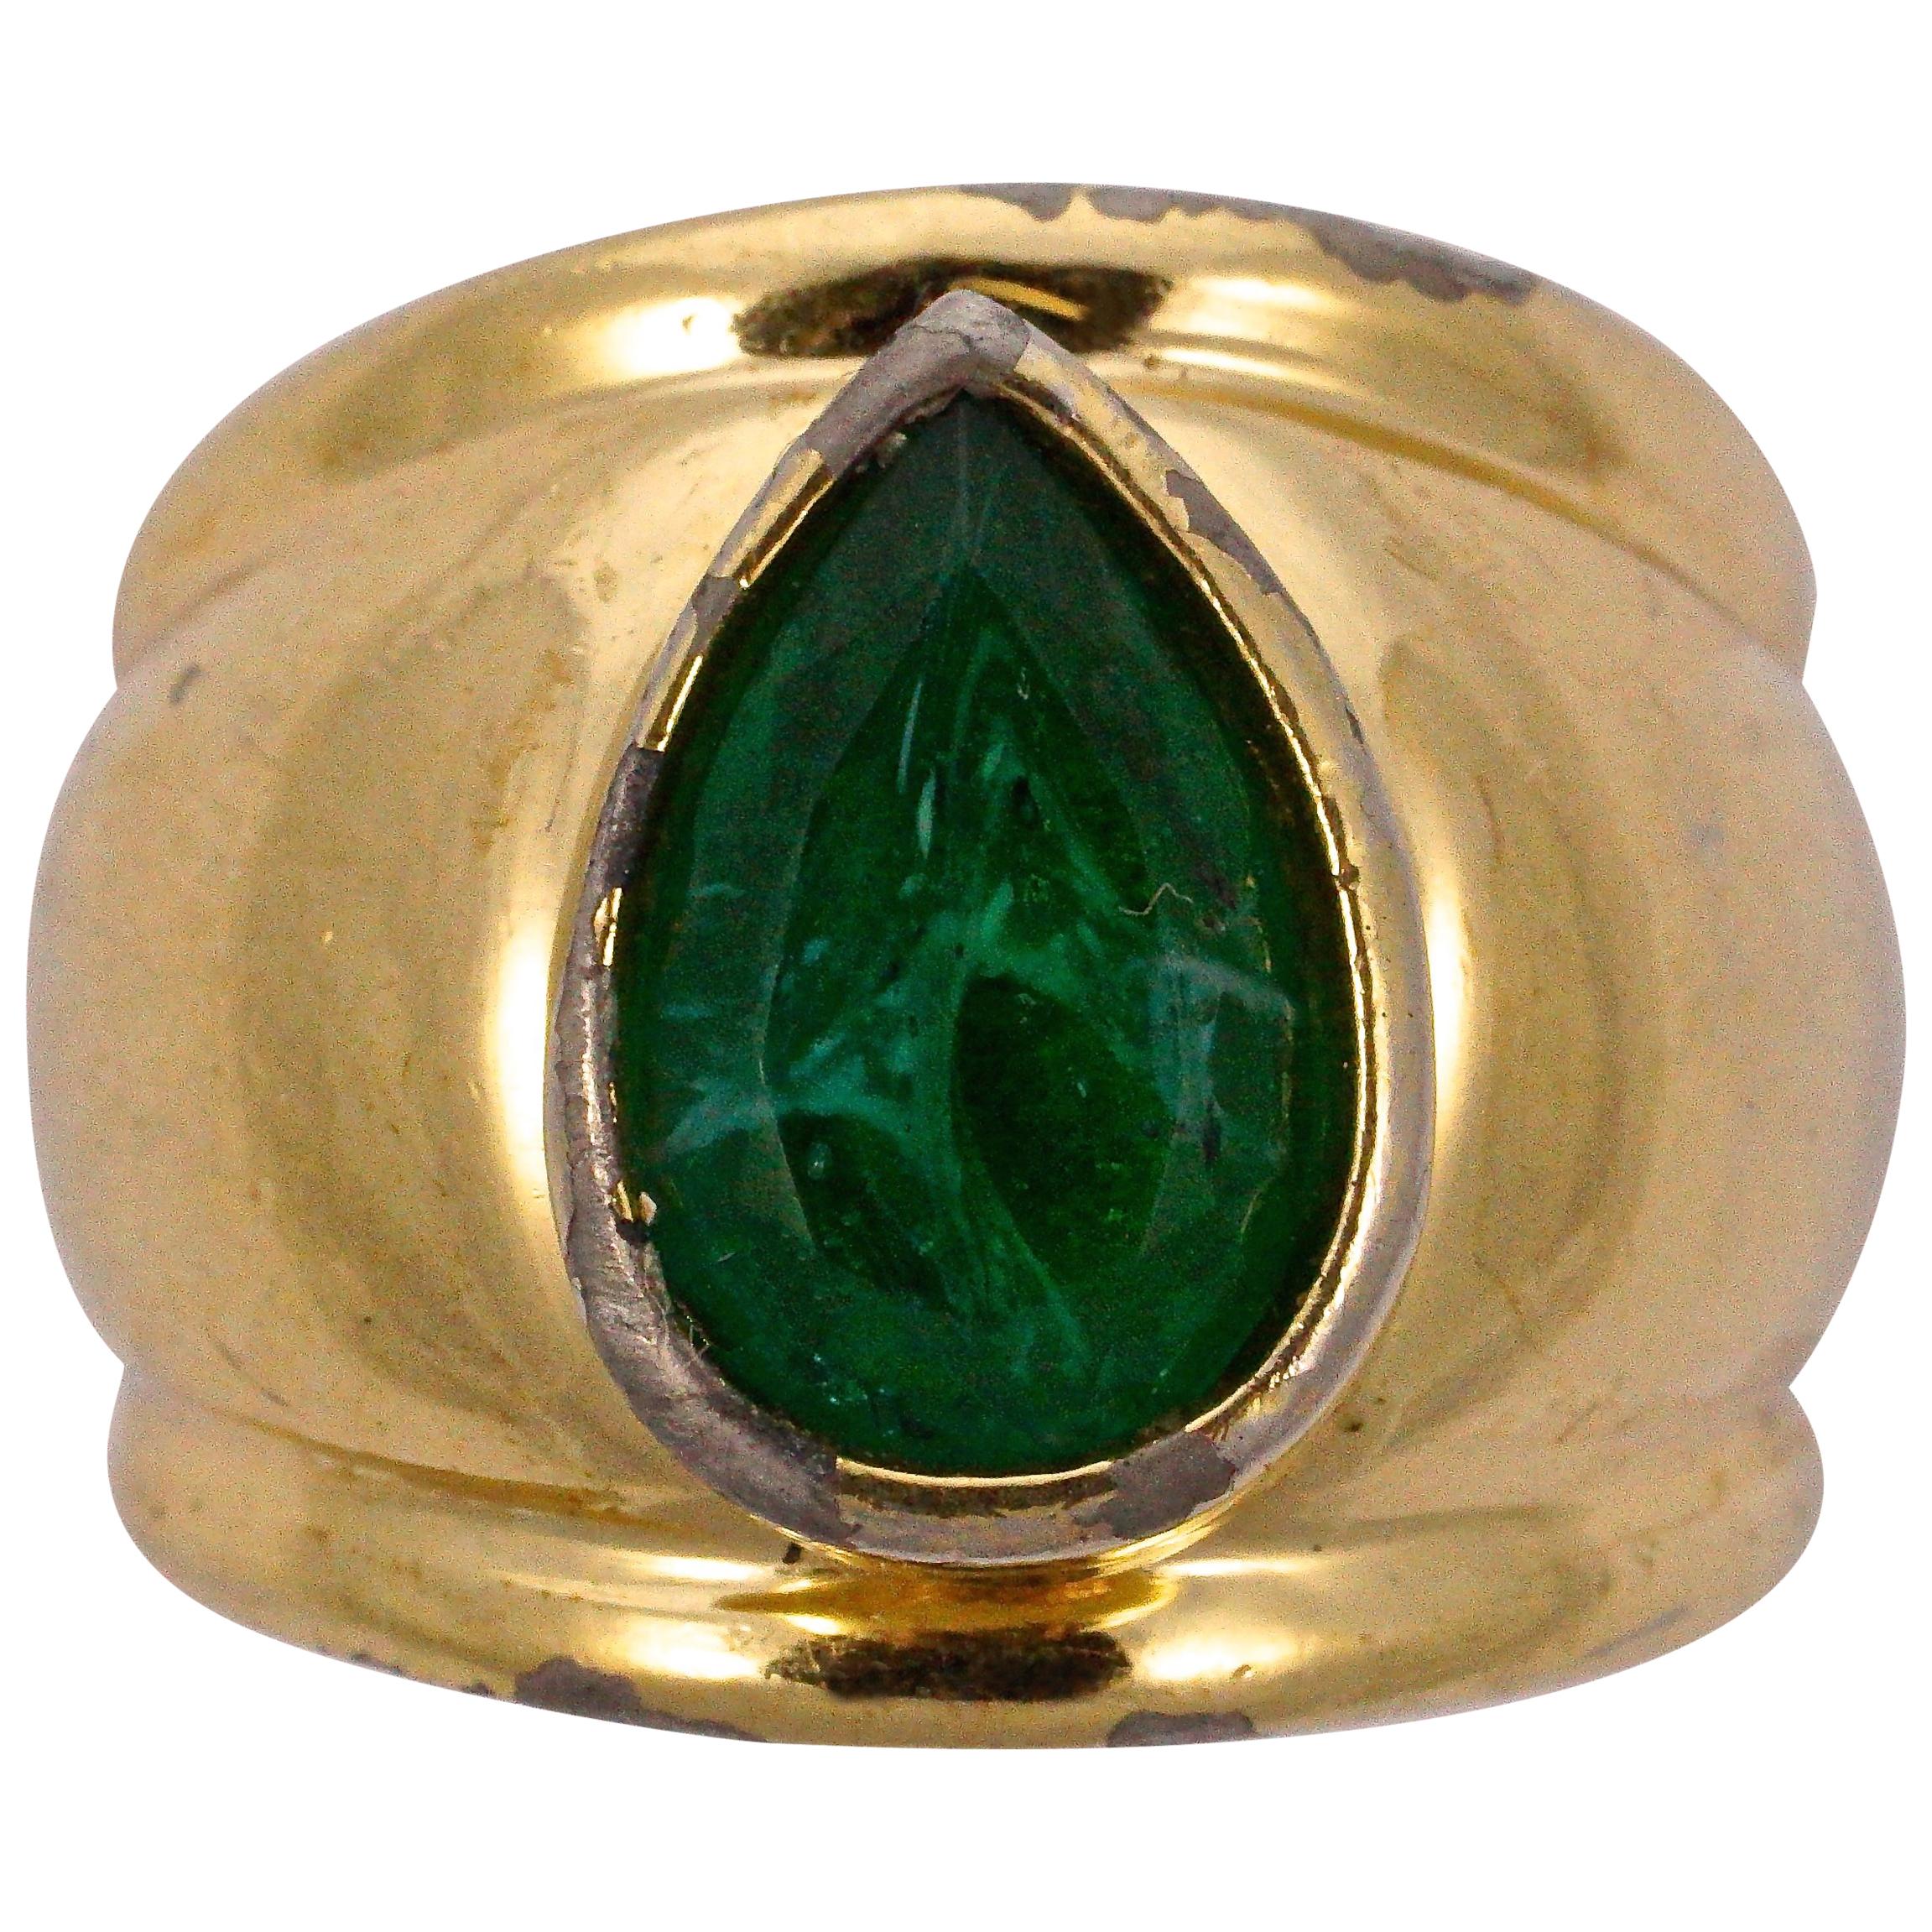 Christian Dior Gold Plated Faux Emerald Ring, circa 1980s